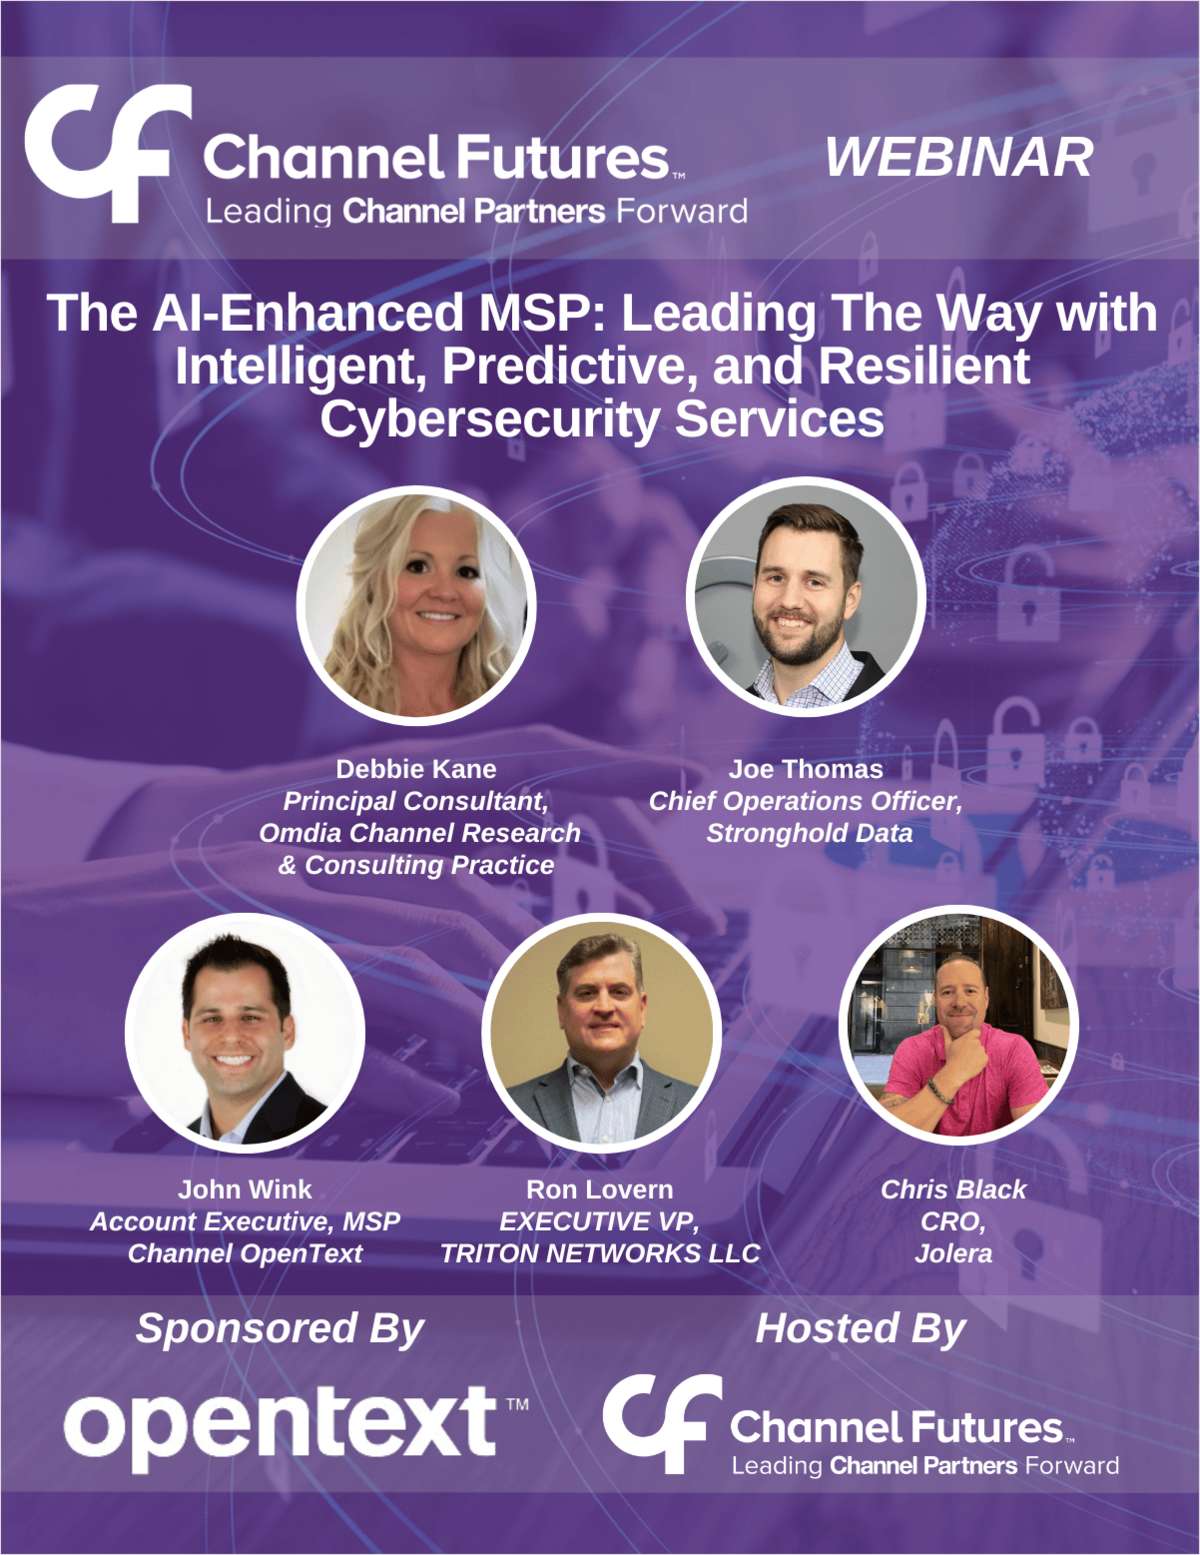 The AI-Enhanced MSP: Leading The Way with Intelligent, Predictive, and Resilient Cybersecurity Services